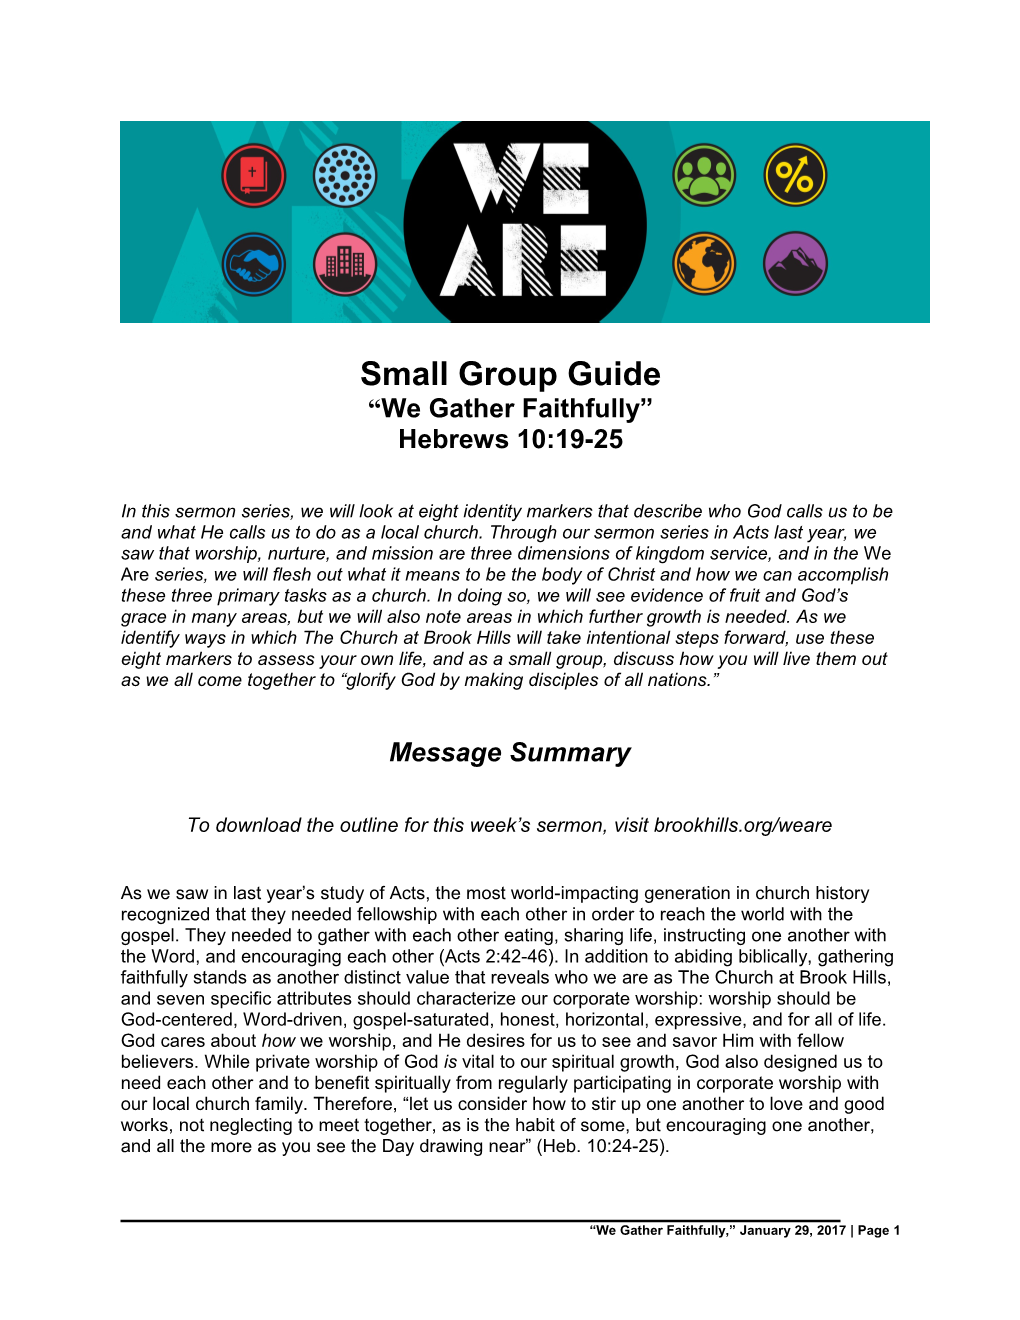 Small Group Guide s1